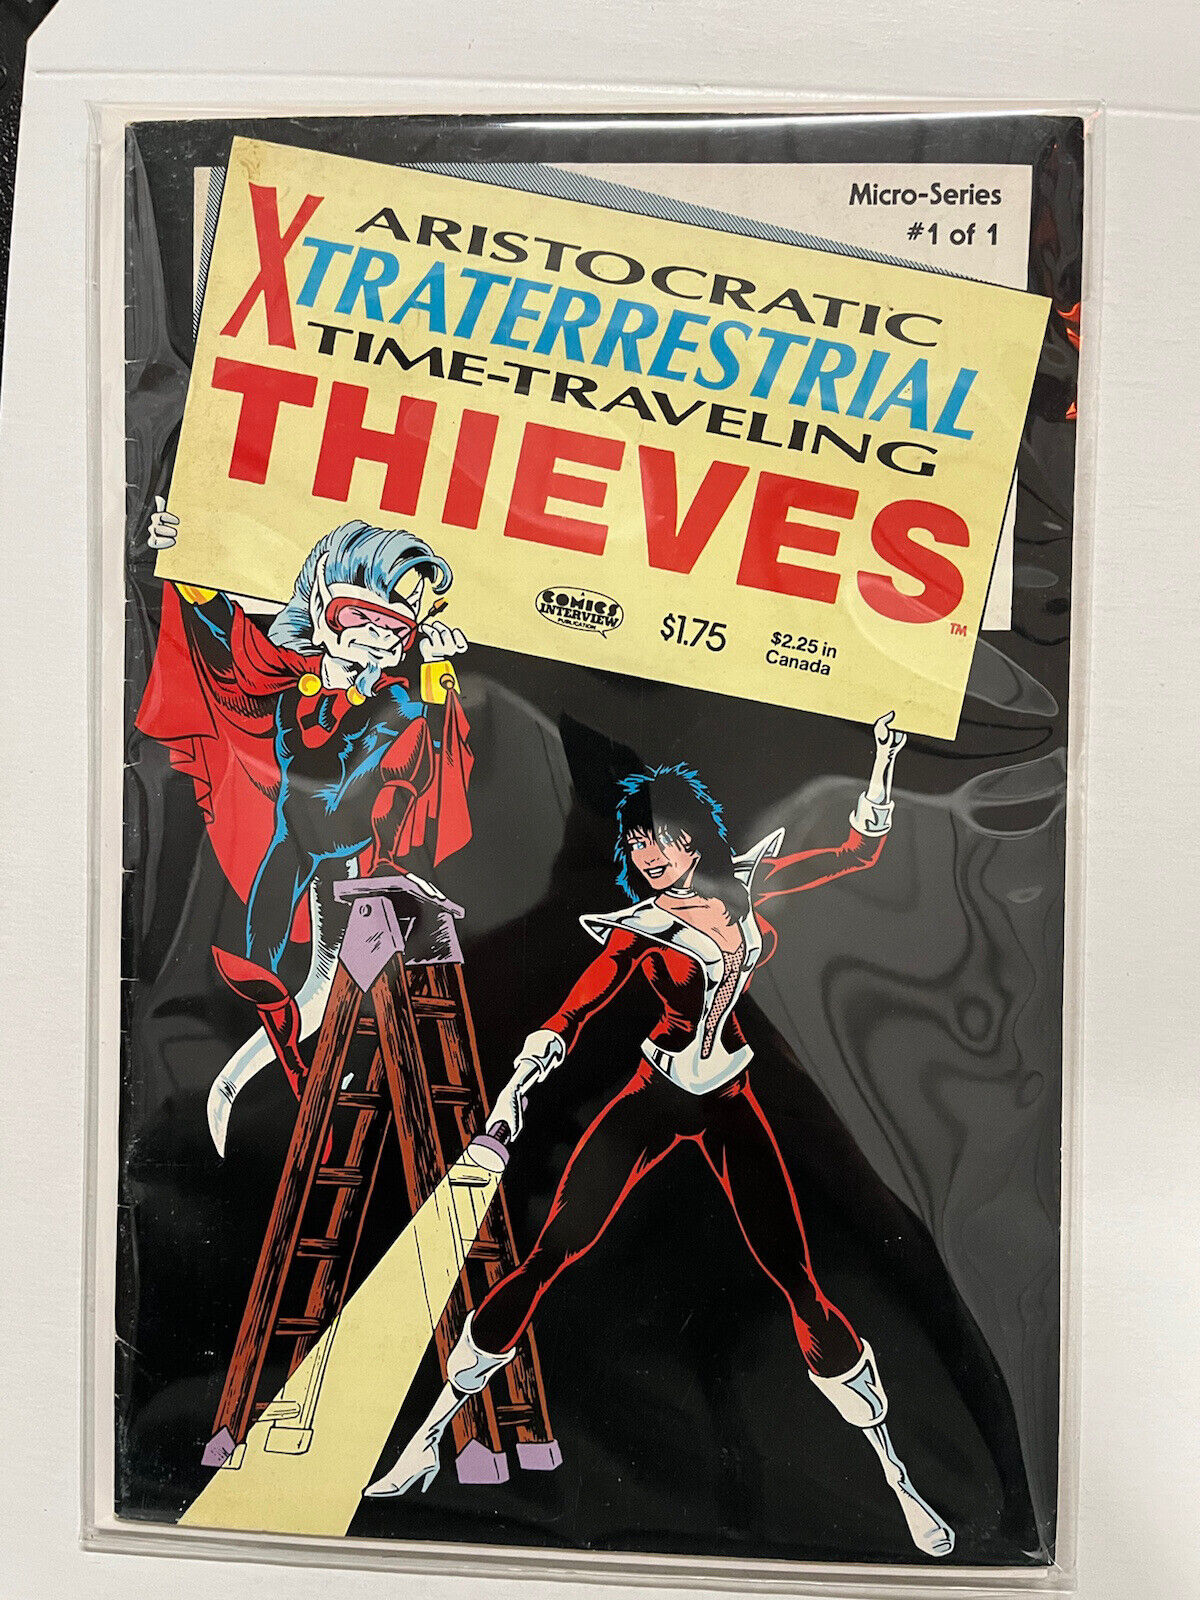 ARISTOCRATIC XTRATERRESTRIAL TIME-TRAVELING THIEVES 1 Micro-Series #1 - NM